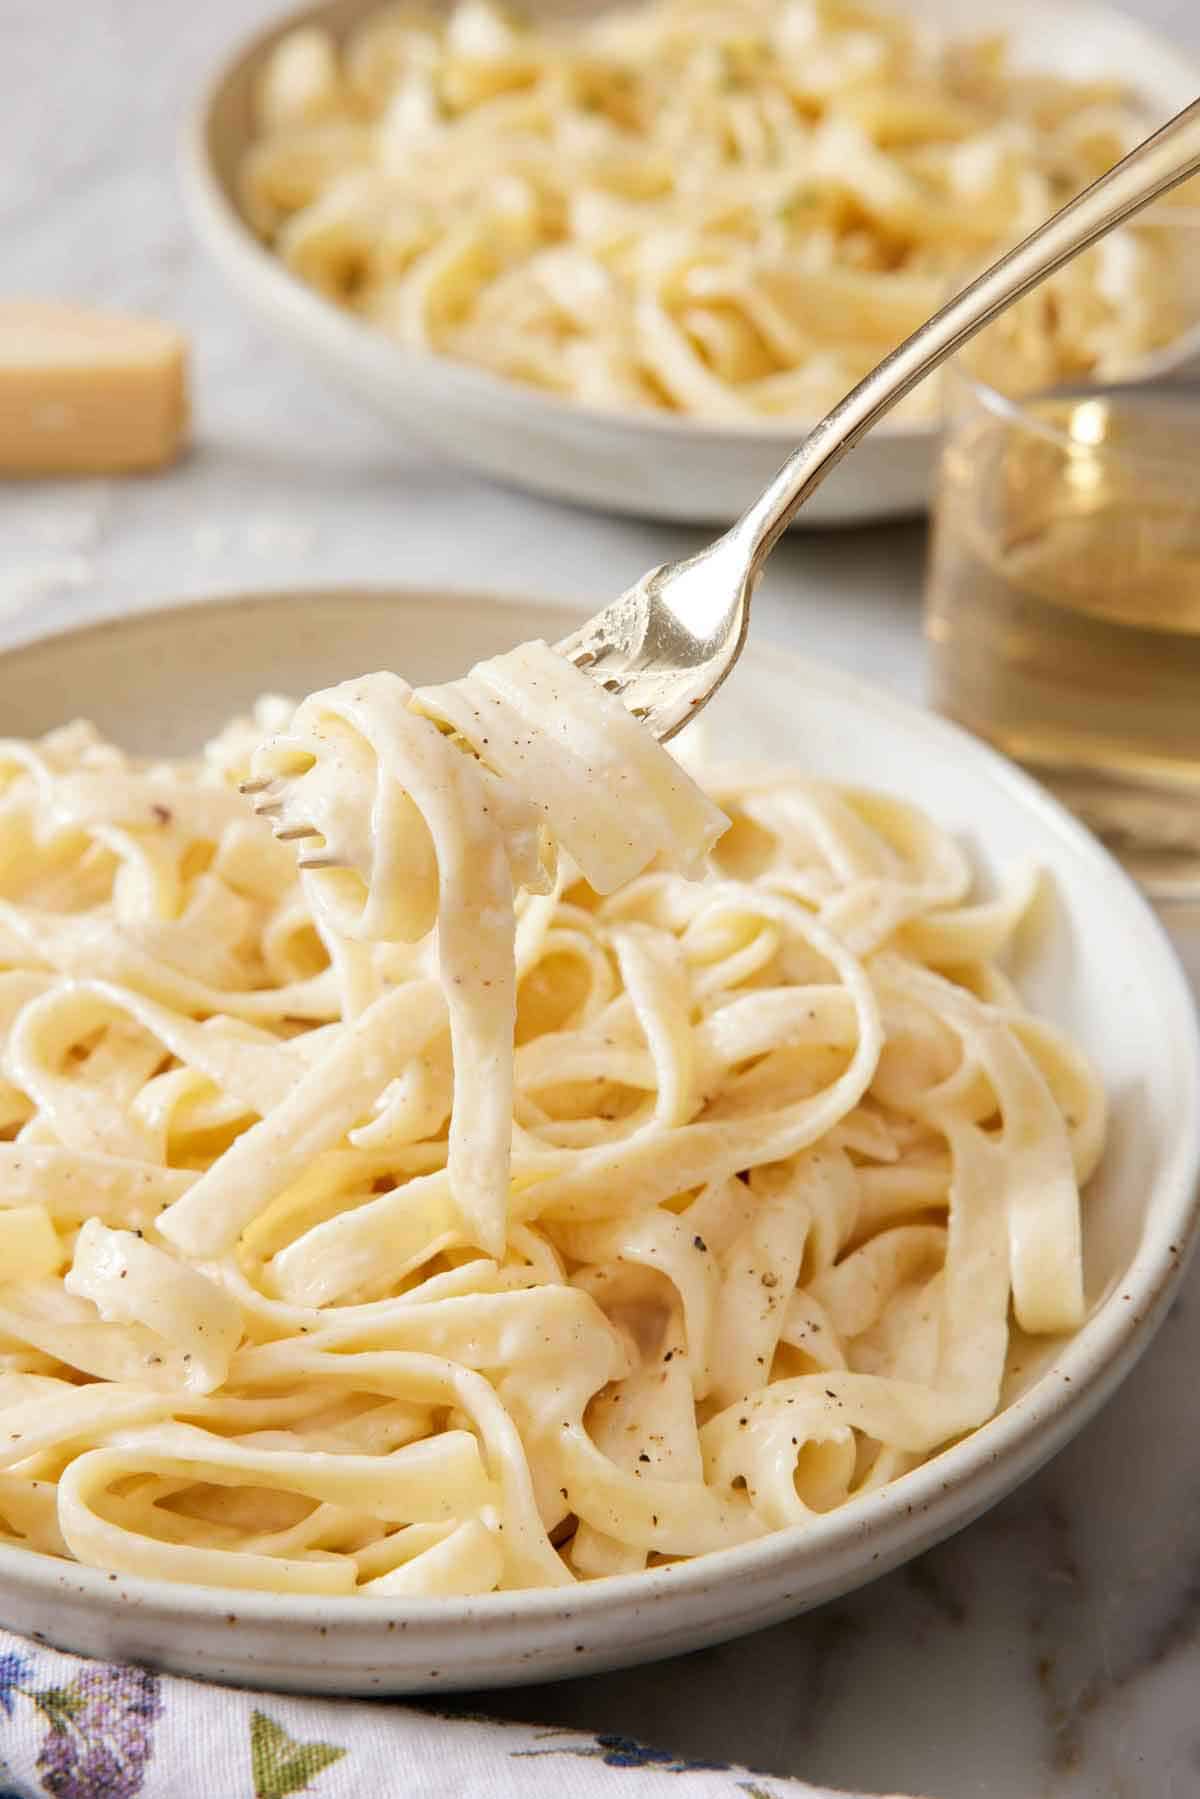 A fork lifting up a bite of fettucine alfredo from a plate. A second plate and glass of wine in the background.